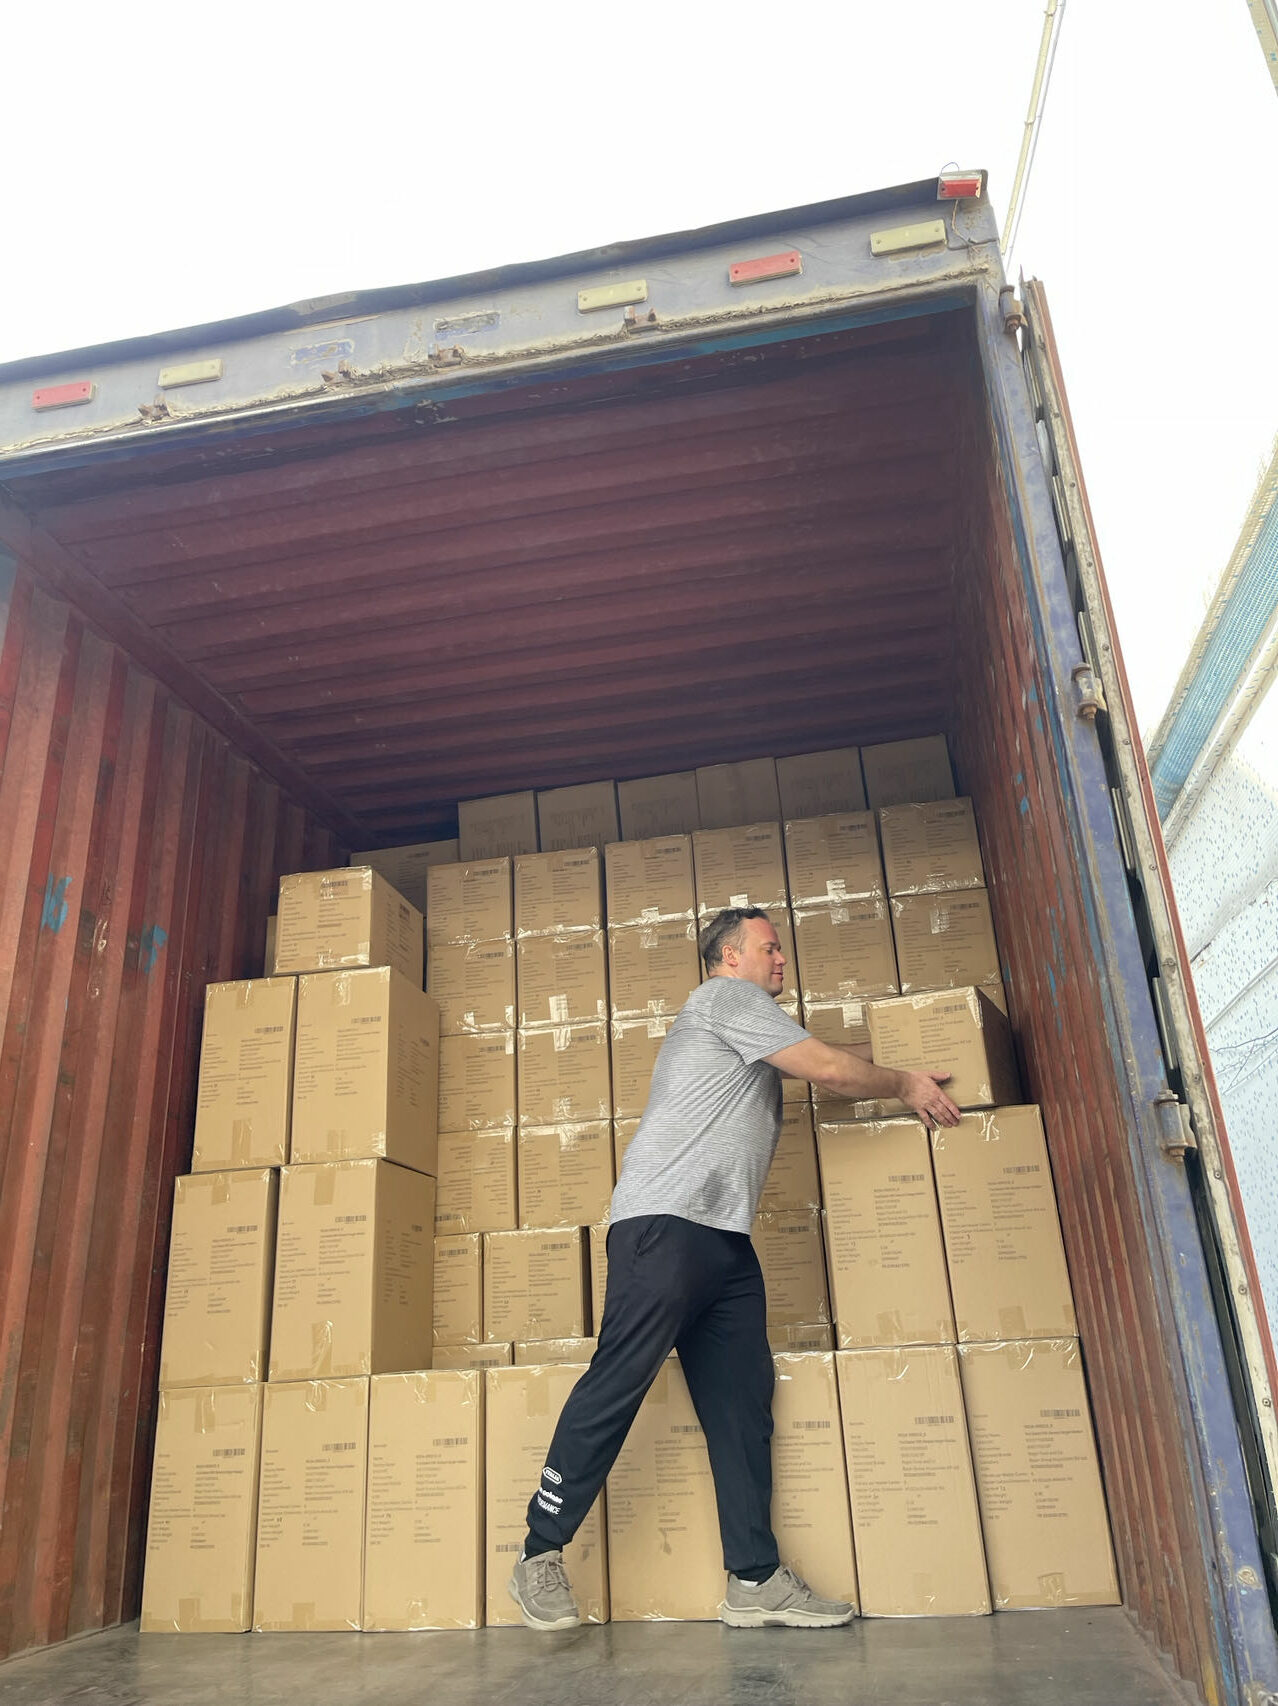 Brian Unloading Boxes